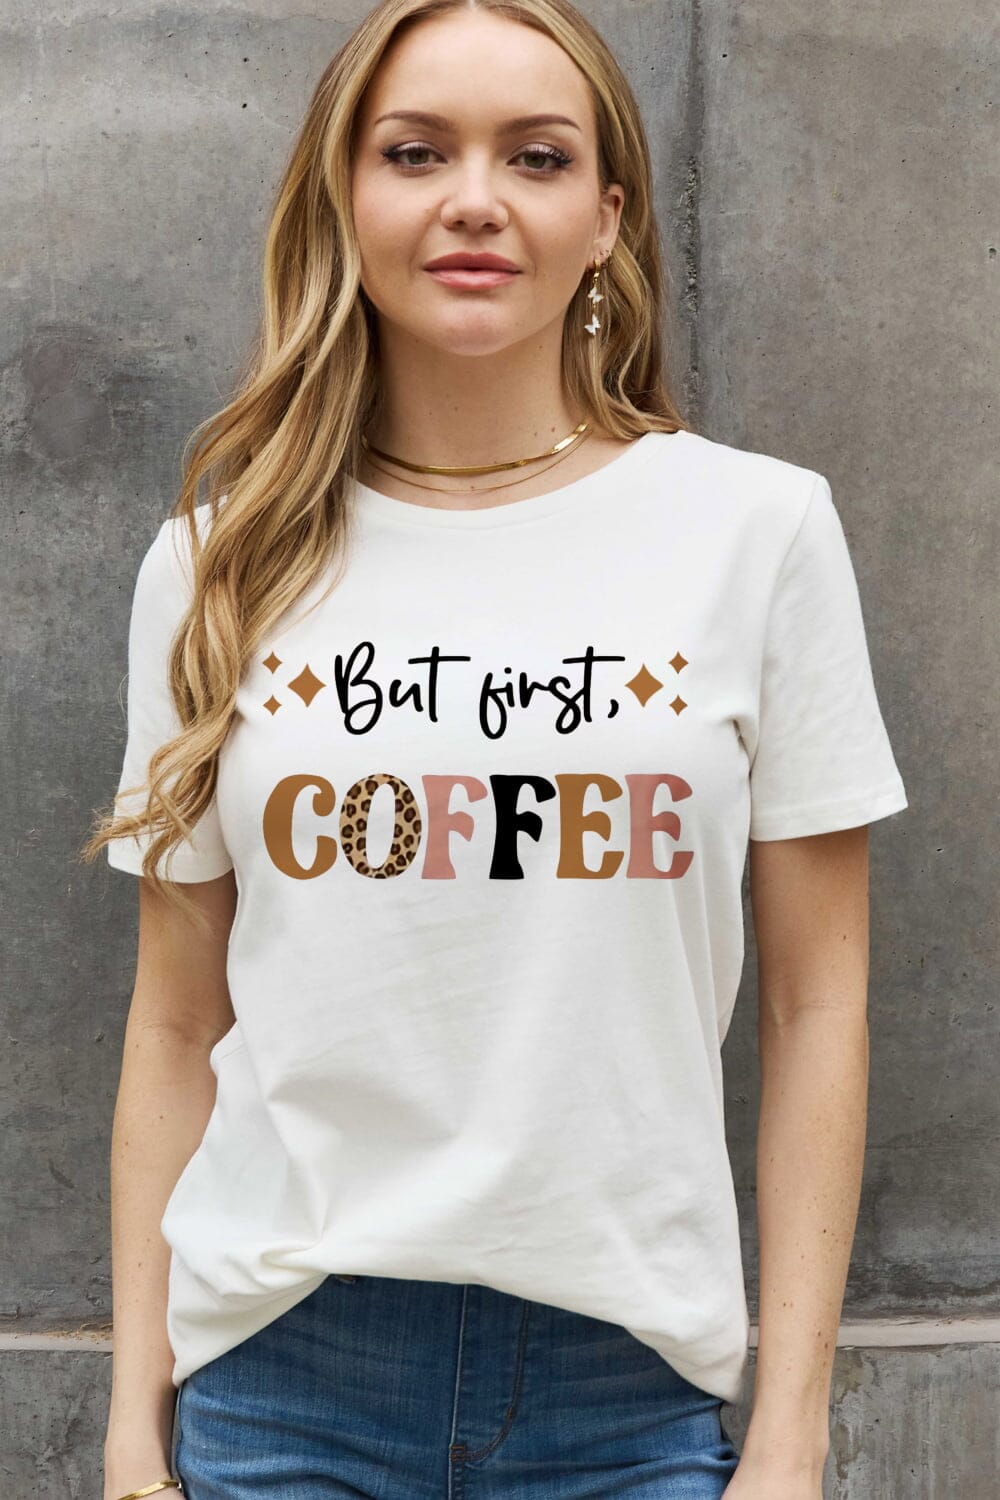 BUT FIRST COFFEE Graphic Cotton Tee - Sydney So Sweet